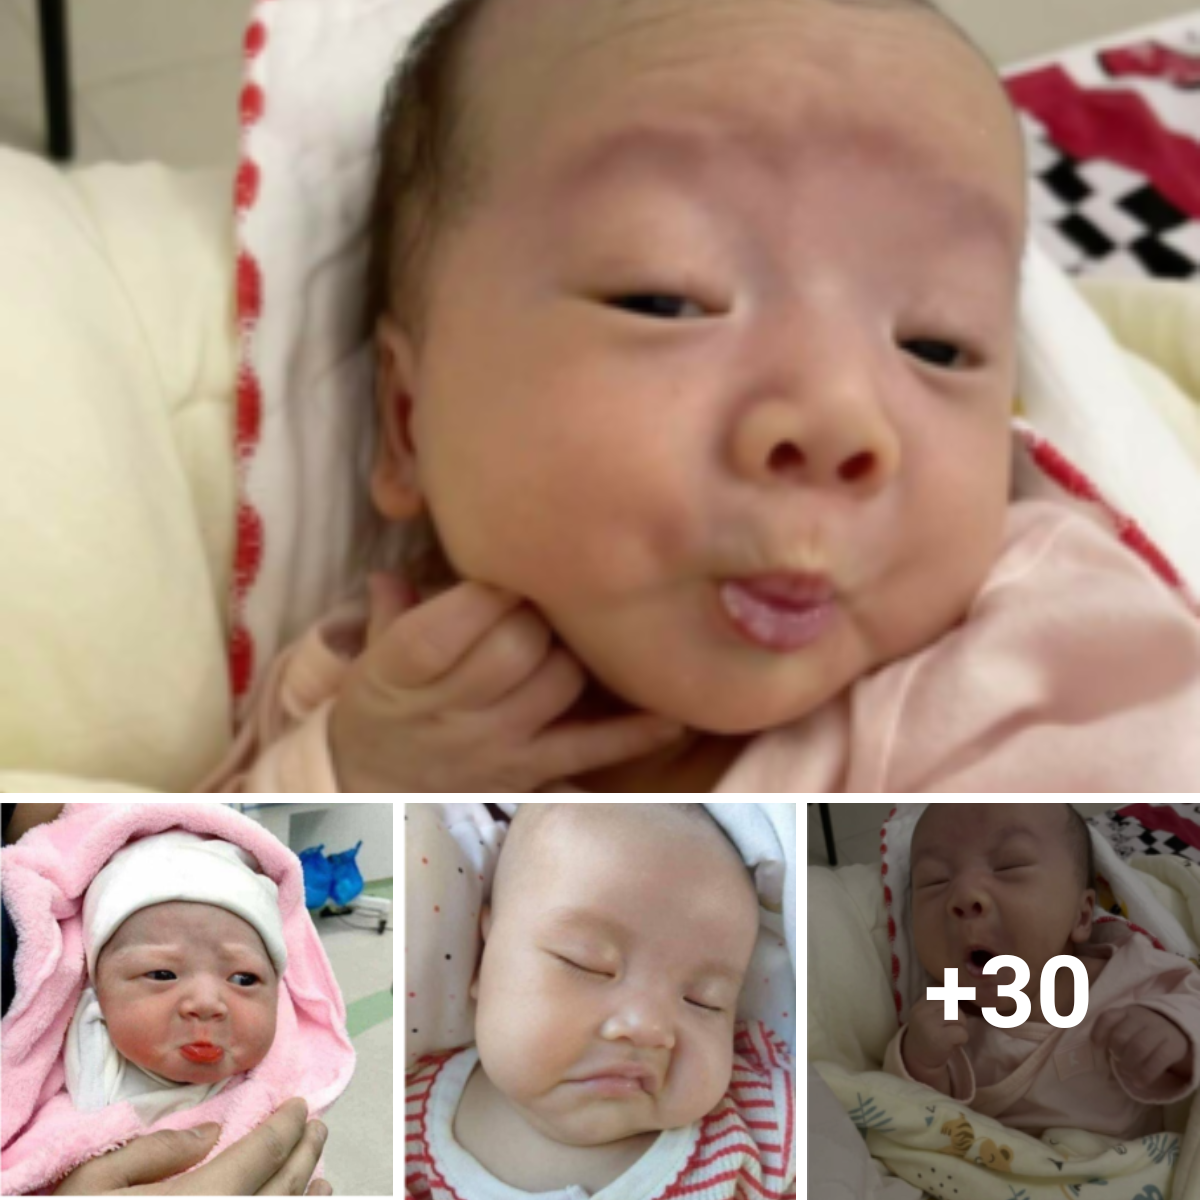 Laughing-Inducing: 20 Cute Baby Expressions That Will Make Parents Happy.